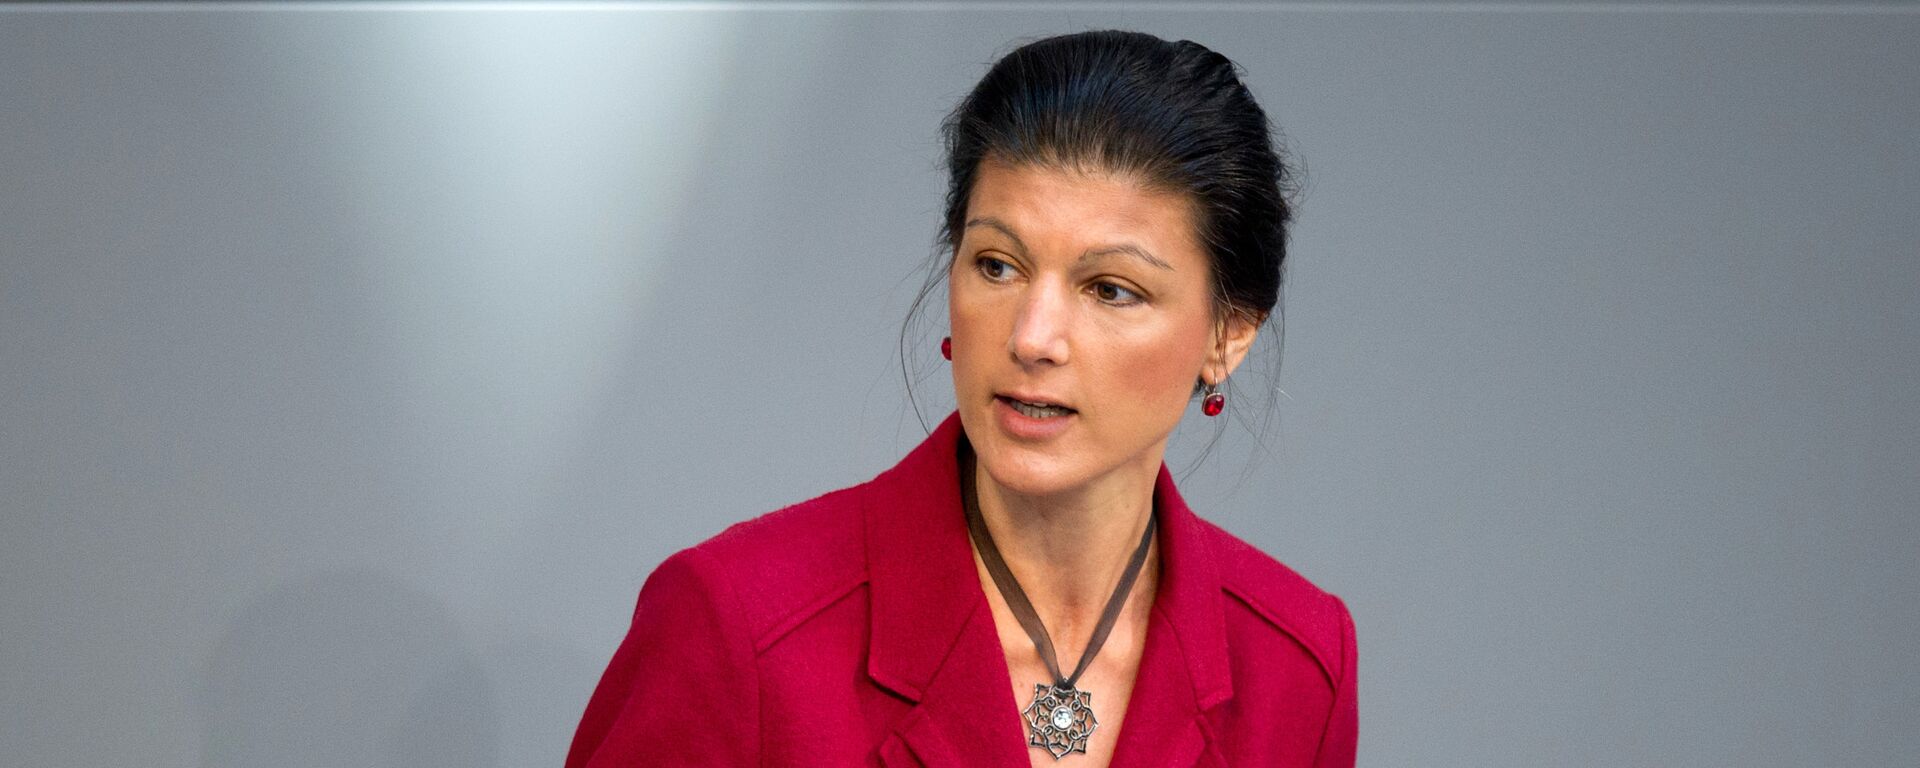 Sahra Wagenknecht of the Left party (Die Linke) delivers her speech at the German parliament on the next EU summit at the German Bundestag in Berlin, on March 19, 2015 - Sputnik International, 1920, 23.10.2023